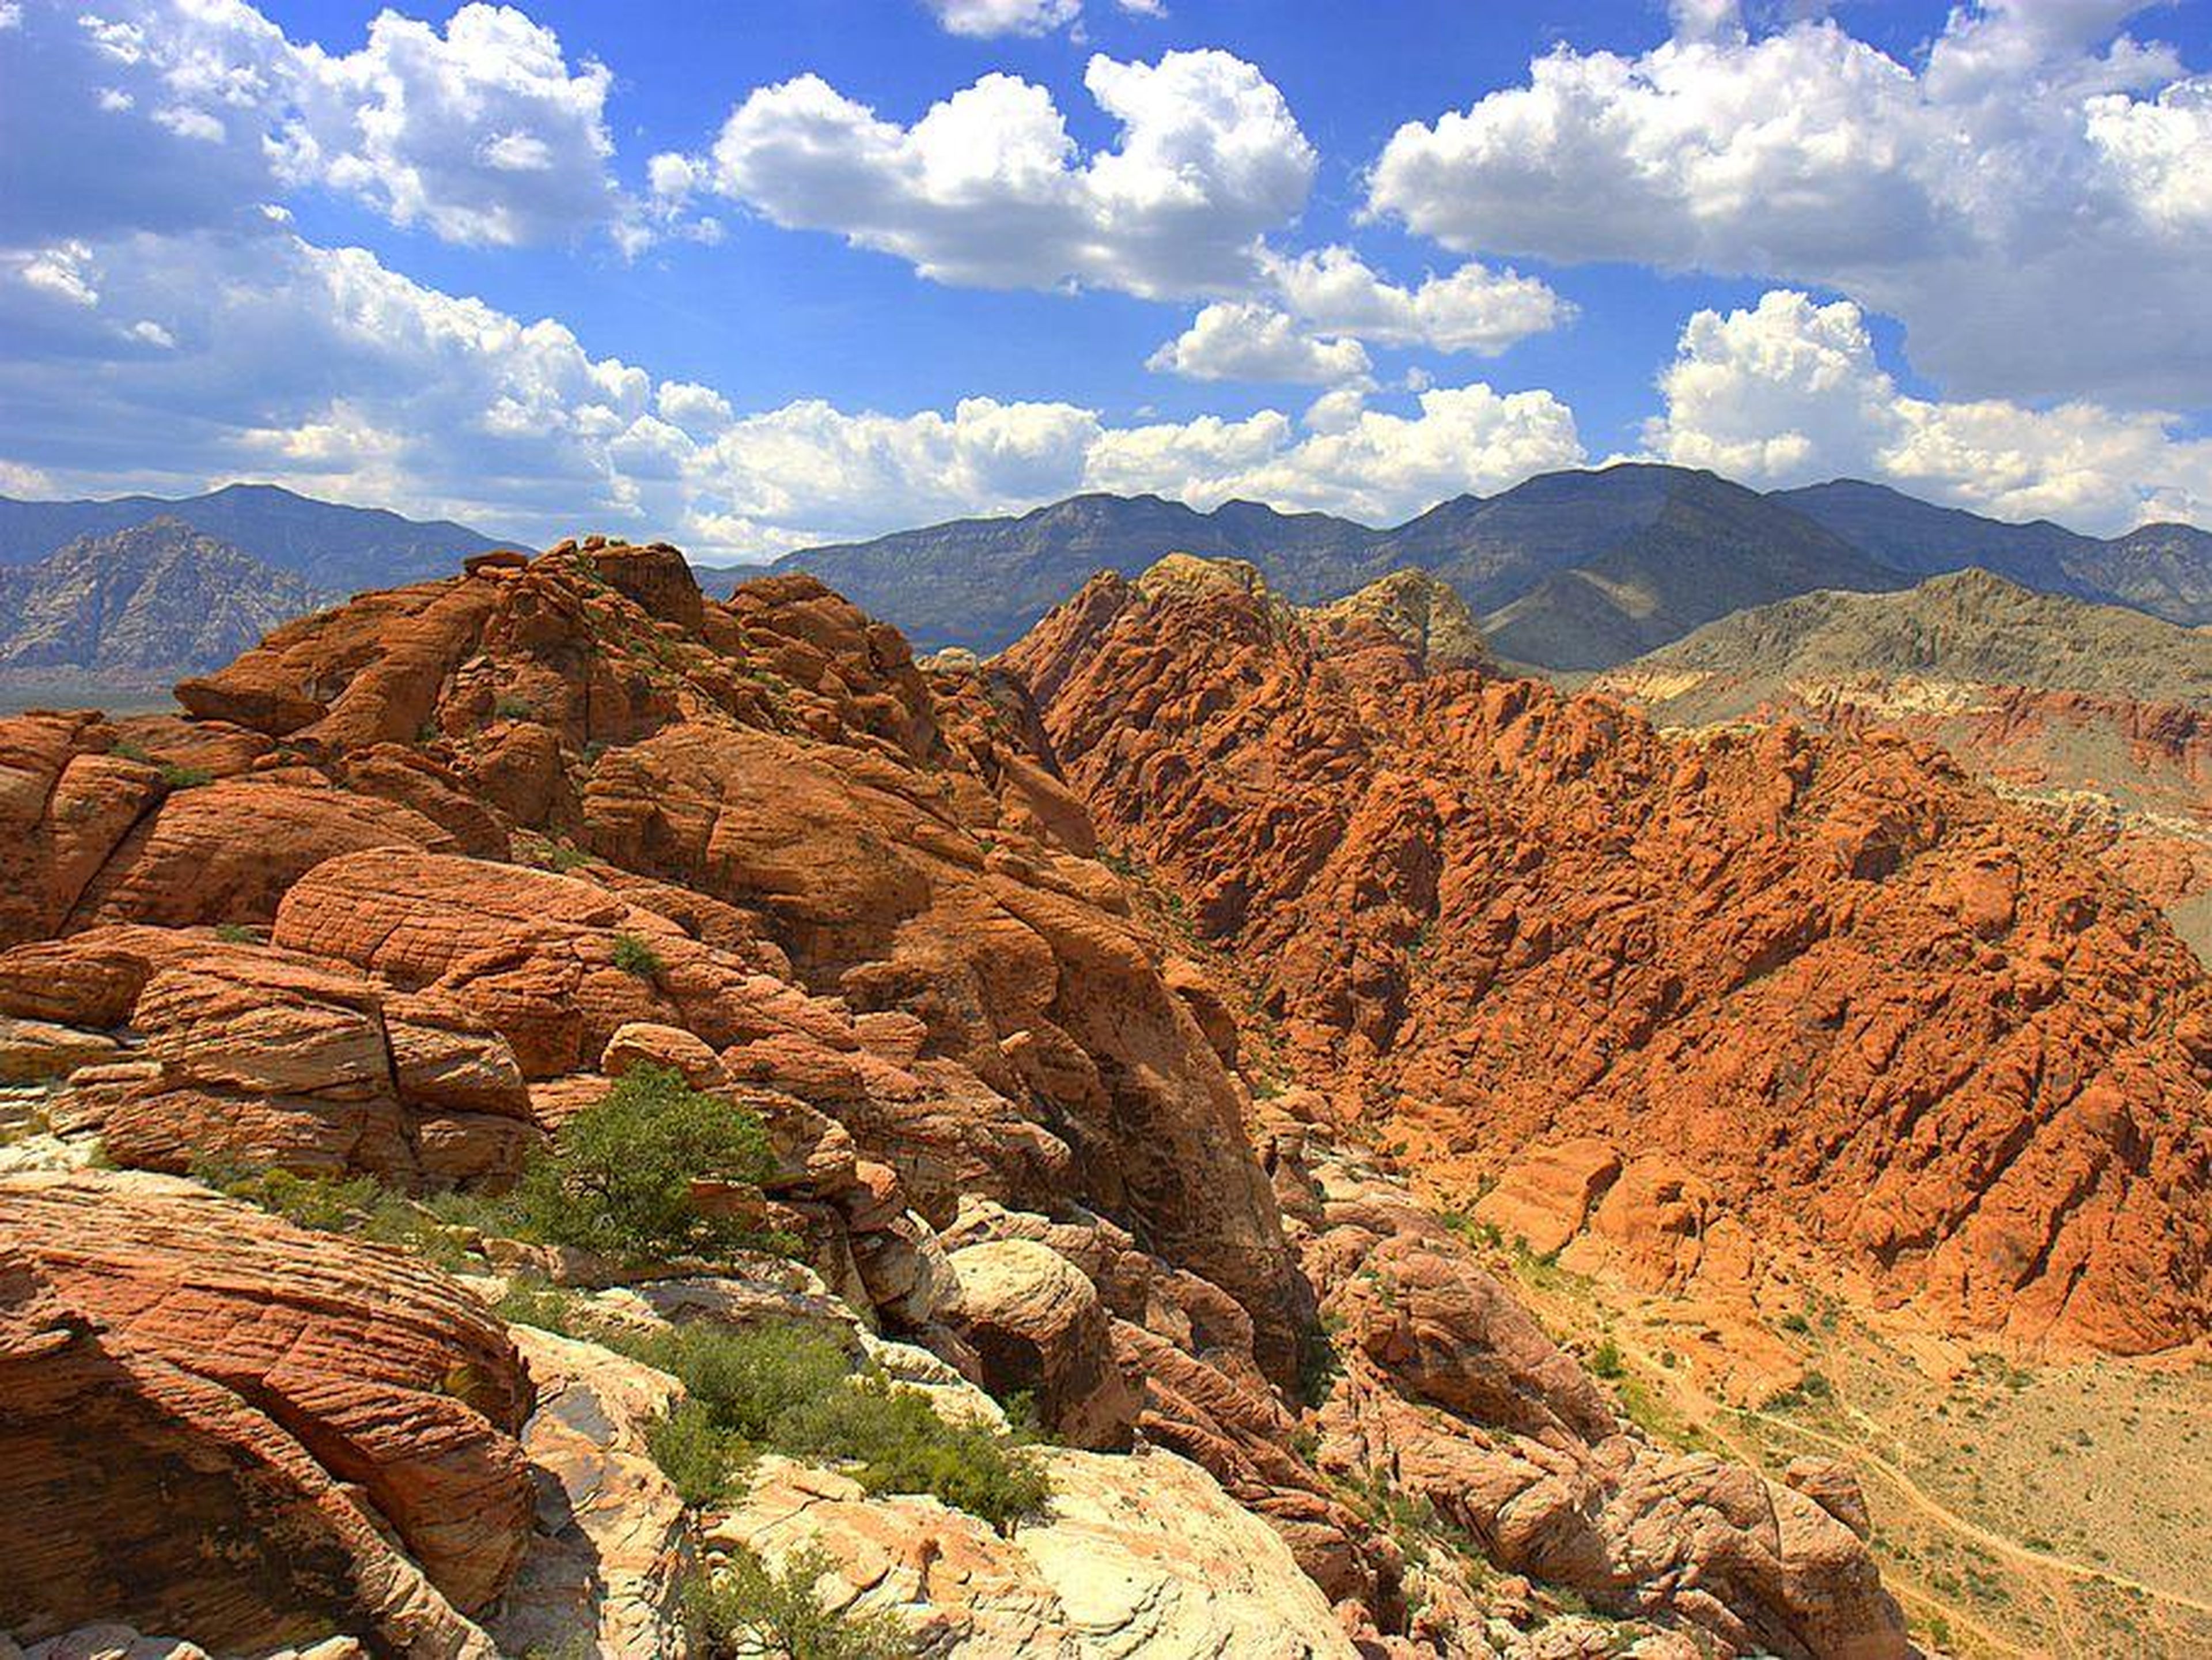 This includes the Red Rock Canyon National Conservation Area ...